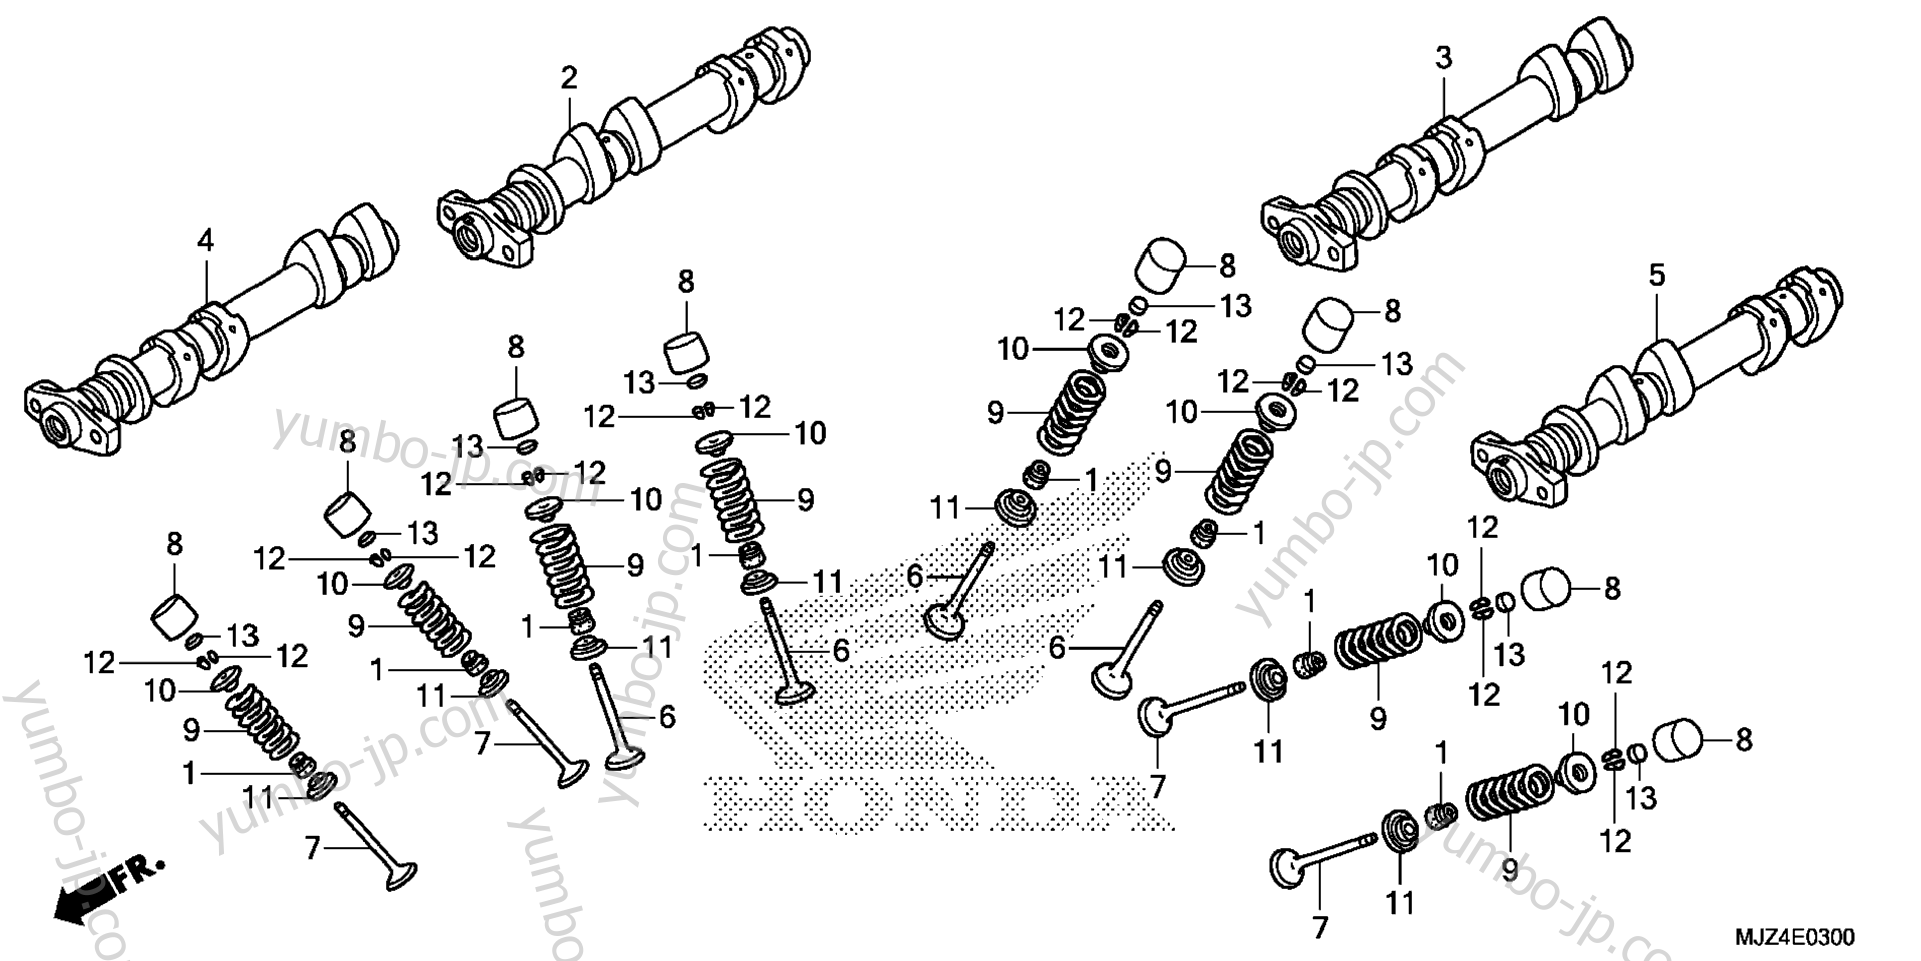 CAMSHAFT / VALVE for motorcycles HONDA ST1300PA AC 2015 year